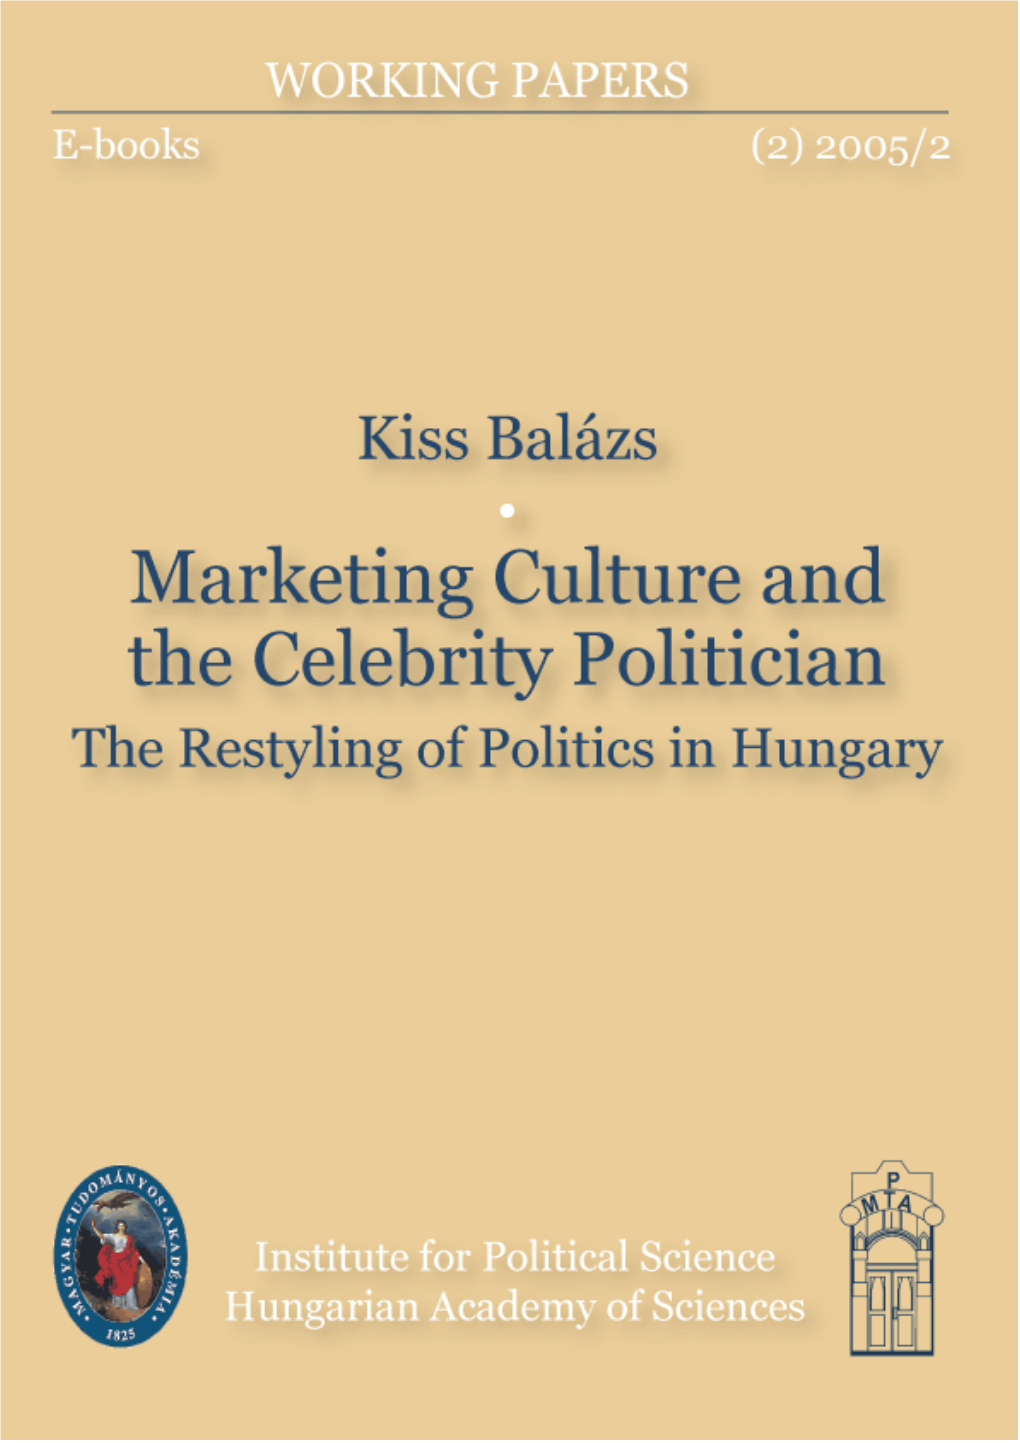 Marketing Culture and the Celebrity Politician